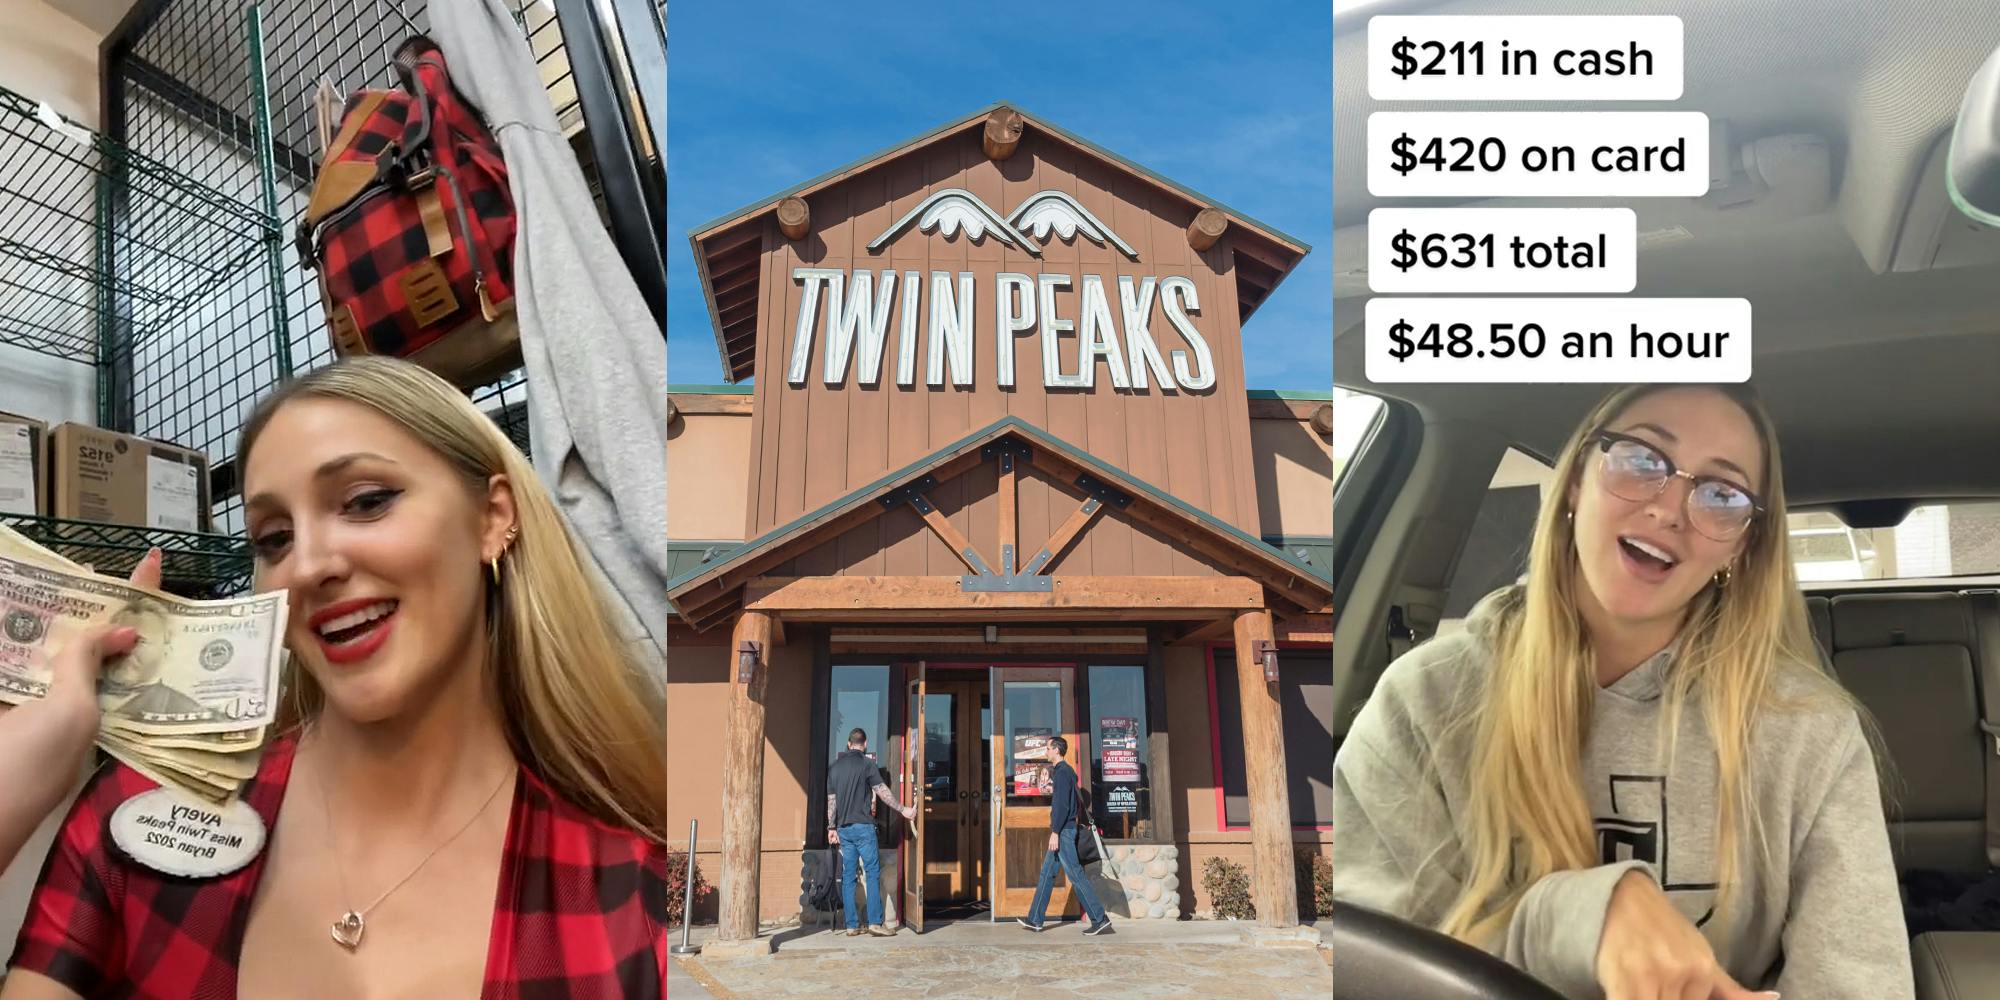 Twin Peaks employee speaking holding cash (l) Twin Peaks building entrance with sign and blue sky (c) Twin Peaks employee speaking in car with caption "$211 in cash $420 on card $631 total $48.50 an hour" (r)